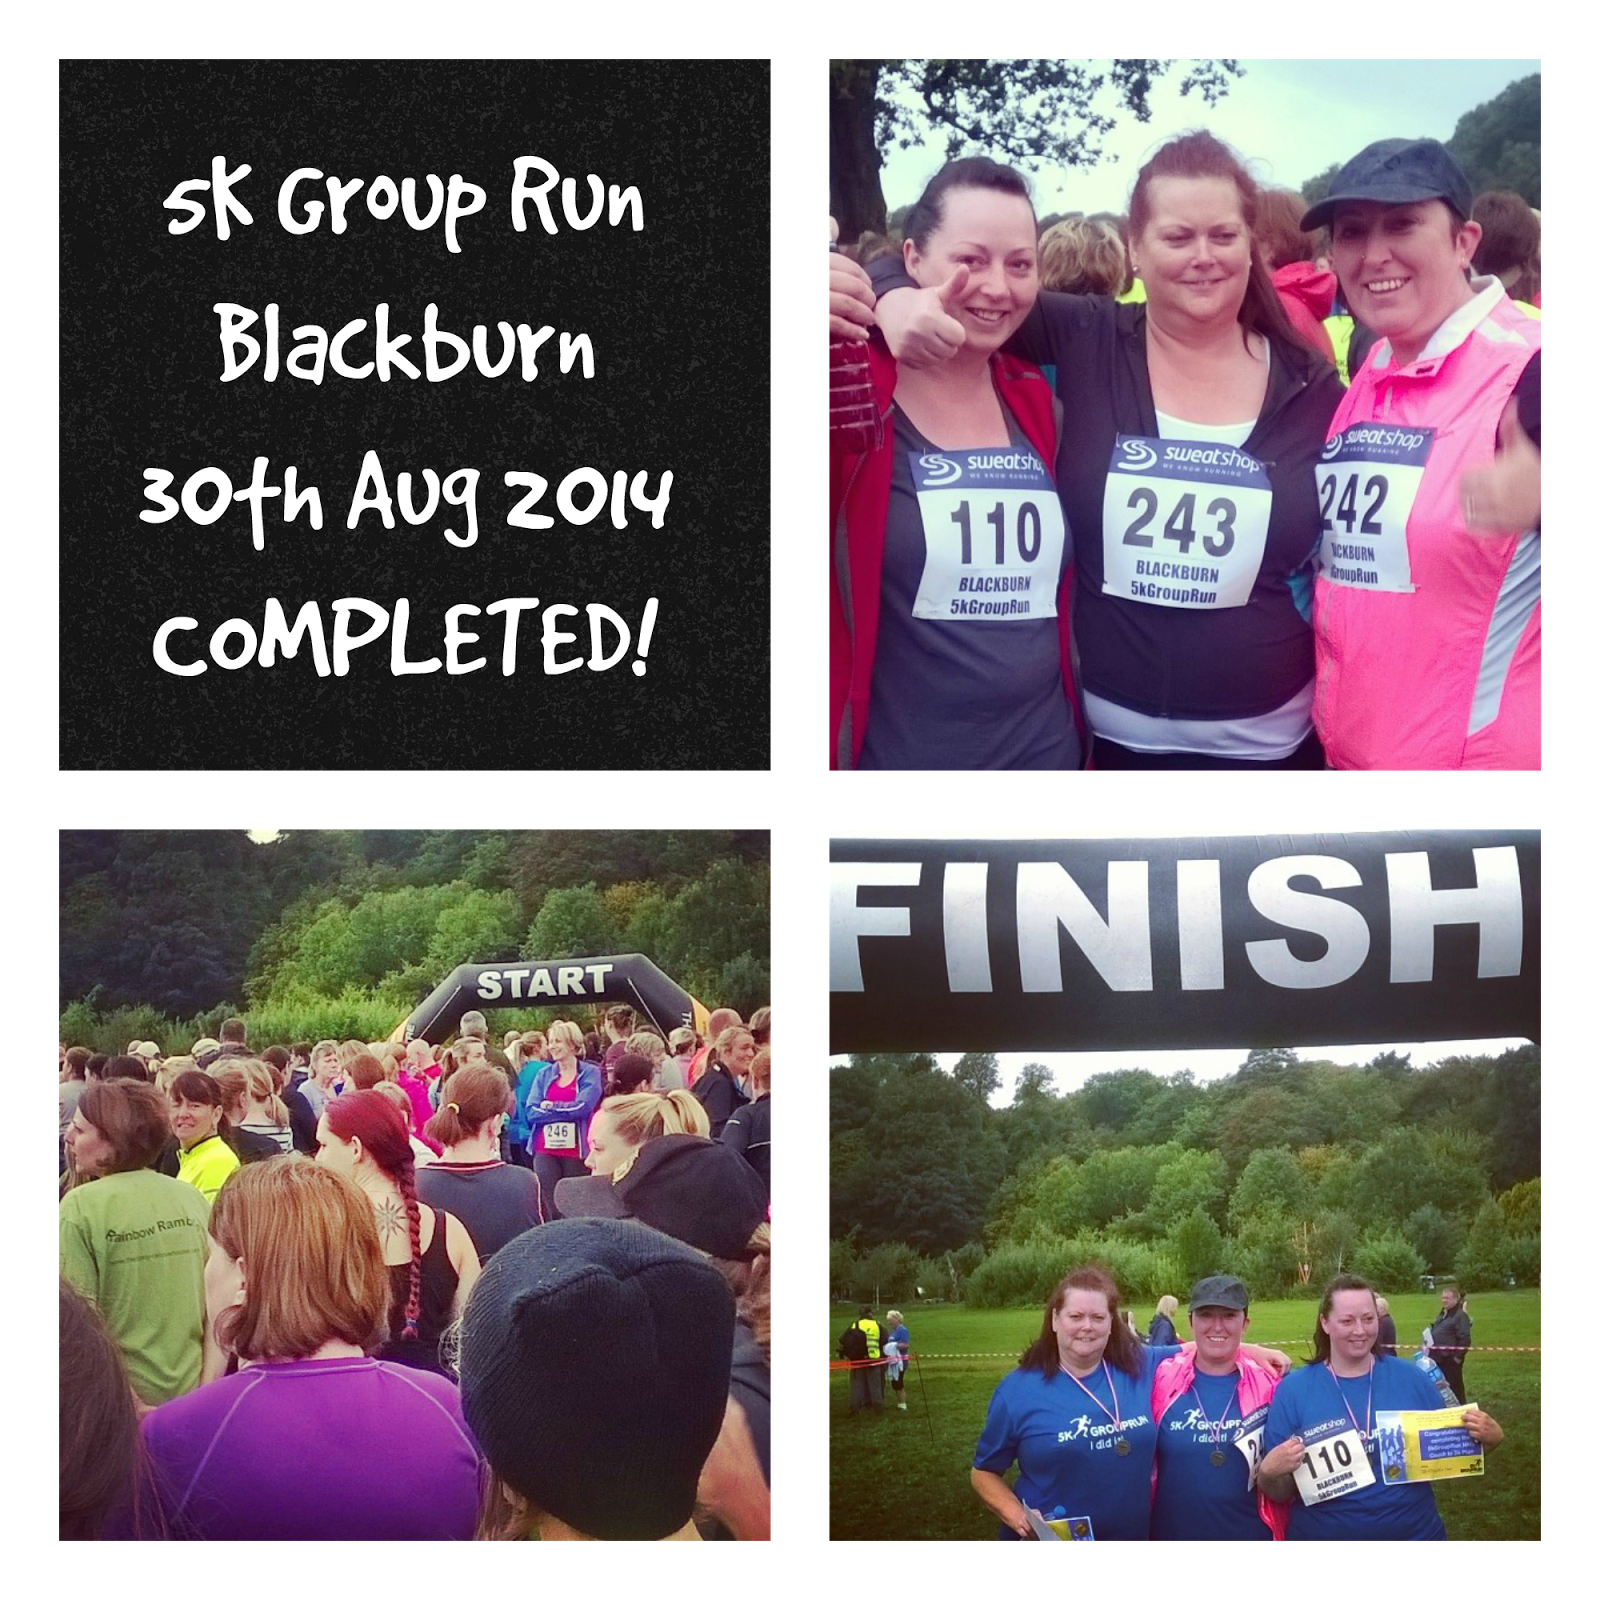 photos from the 5K Group Run in August 2014